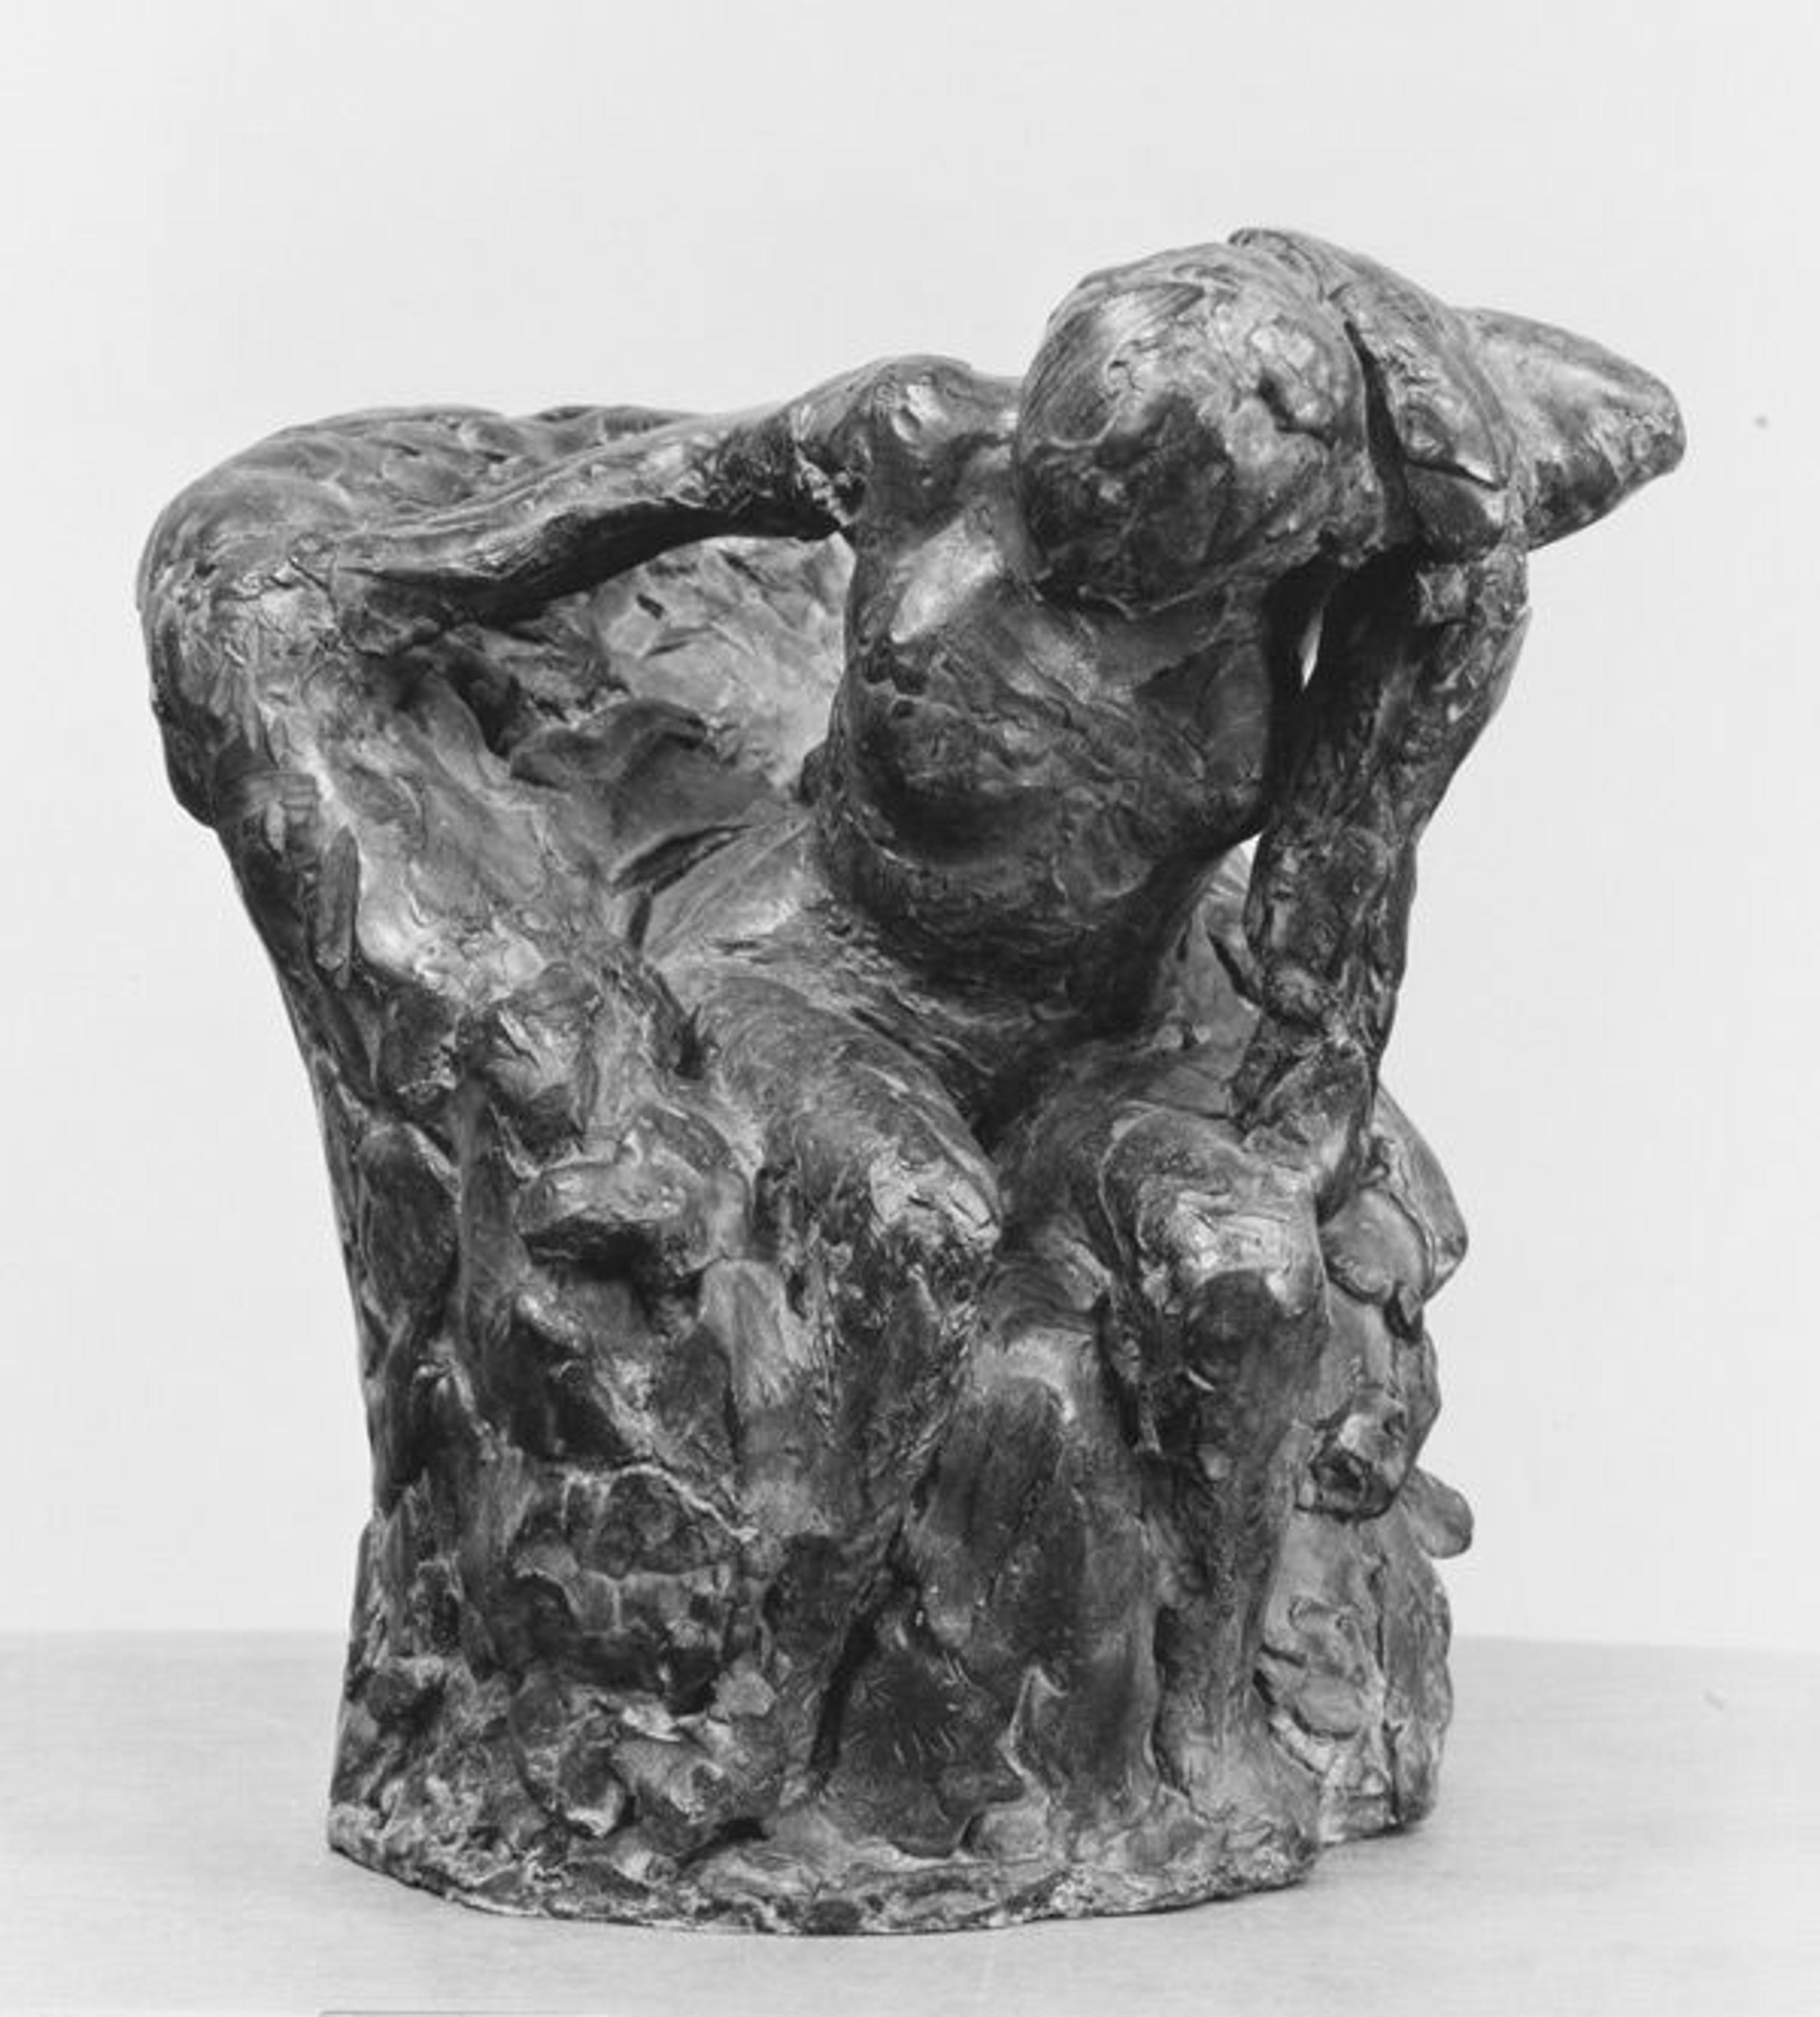 Edgar Degas (French, 1834–1917). Woman Seated in an Armchair Wiping Her Neck, modeled probably before 1902, cast 1920. French. Bronze; 12-3/4 x 12-1/4 x 10-1/2 in. (32.4 x 31.1 x 26.7 cm.). The Metropolitan Museum of Art, New York, H.O. Havemeyer Collection, Bequest of Mrs. H.O. Havemeyer, 1929 (29.100.412)